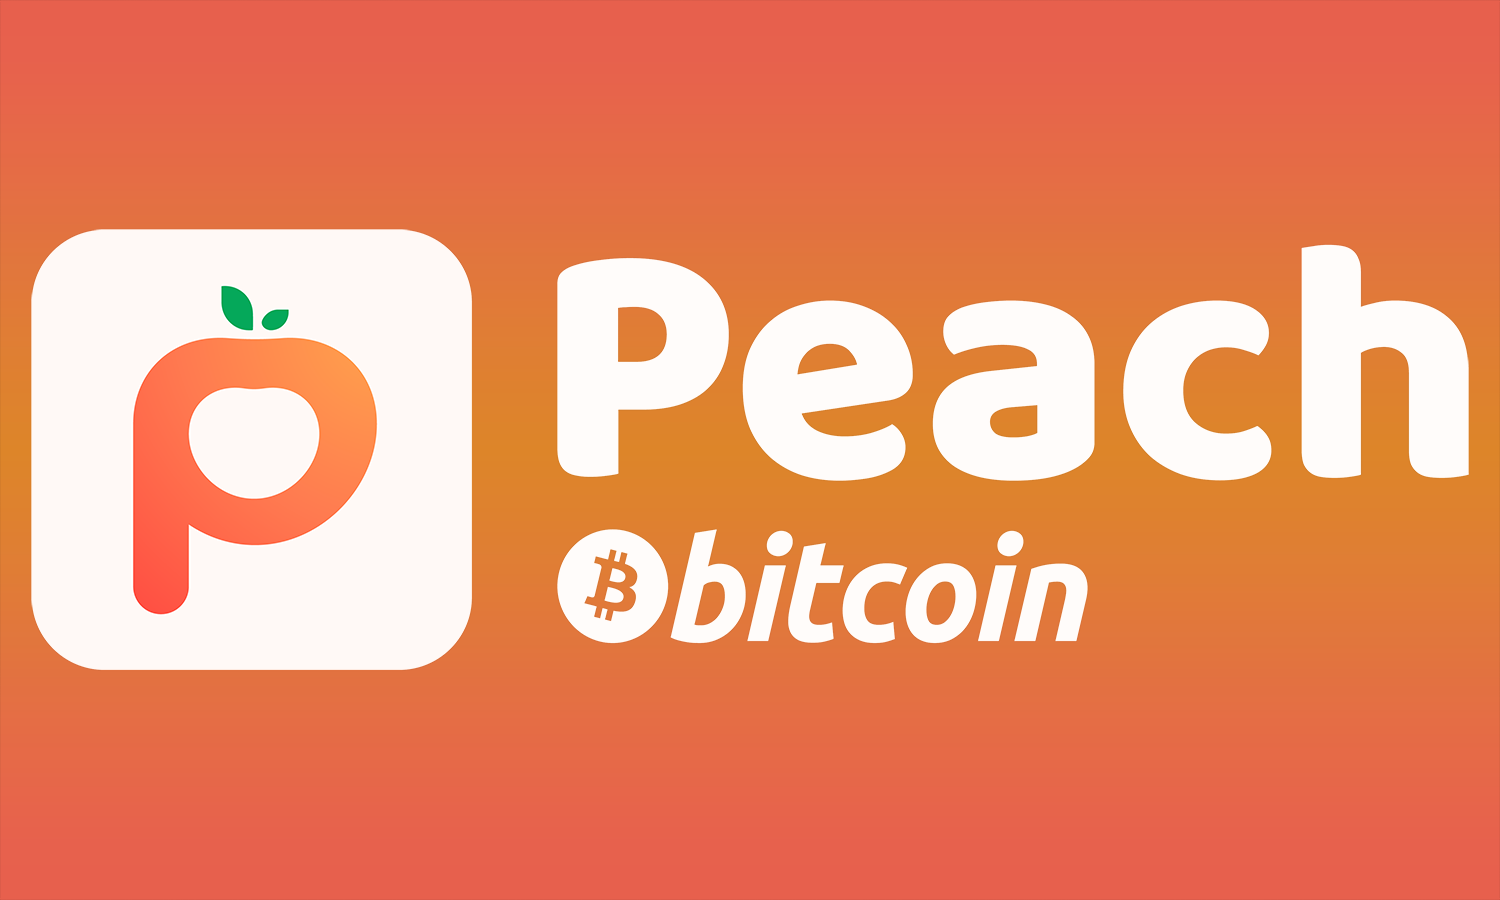 Peach Bitcoin v0.3.0: Open Source Code, Full Wallet Functionality, GroupHug & Global South Expansion